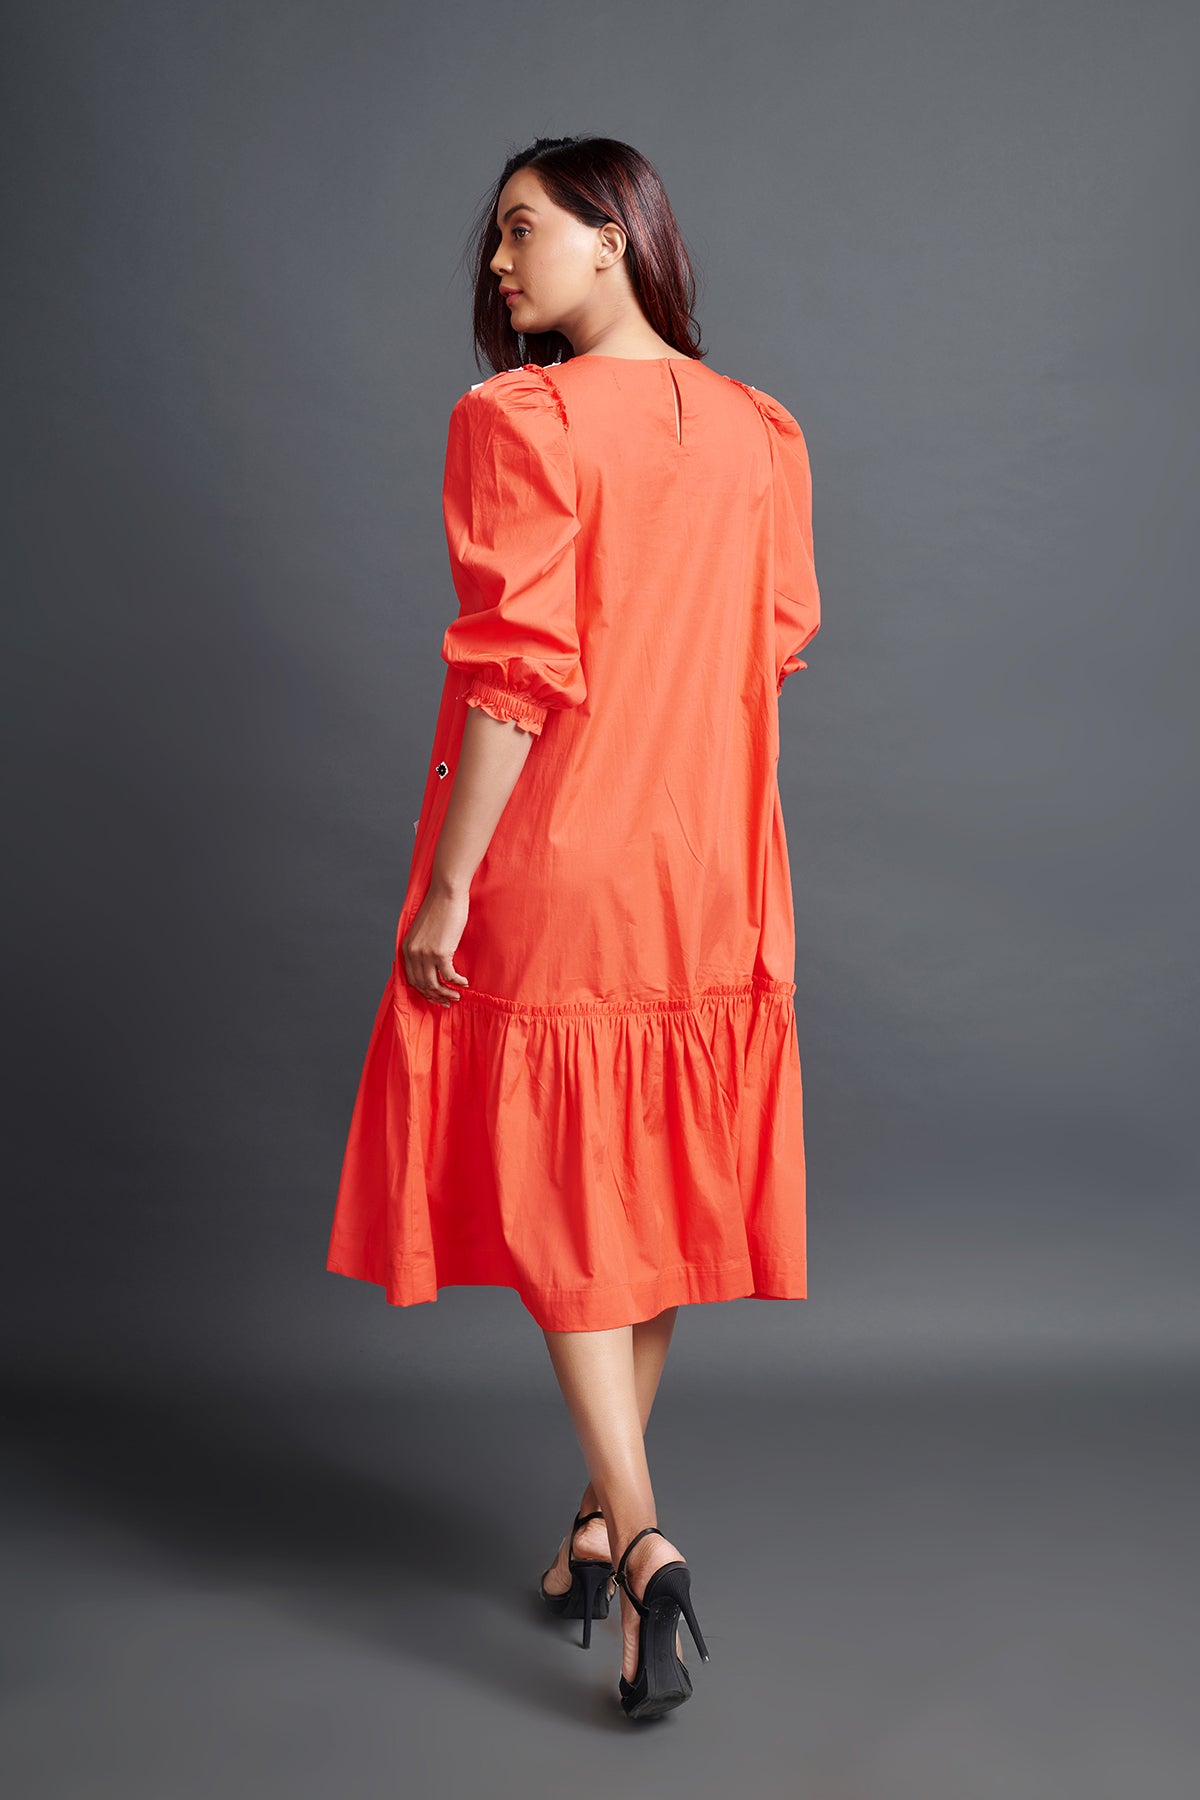 Image of ORANGE GATHERED HEM DRESS IN COTTON BASE WITH CUTWORK EMBROIDERY. From savoirfashions.com